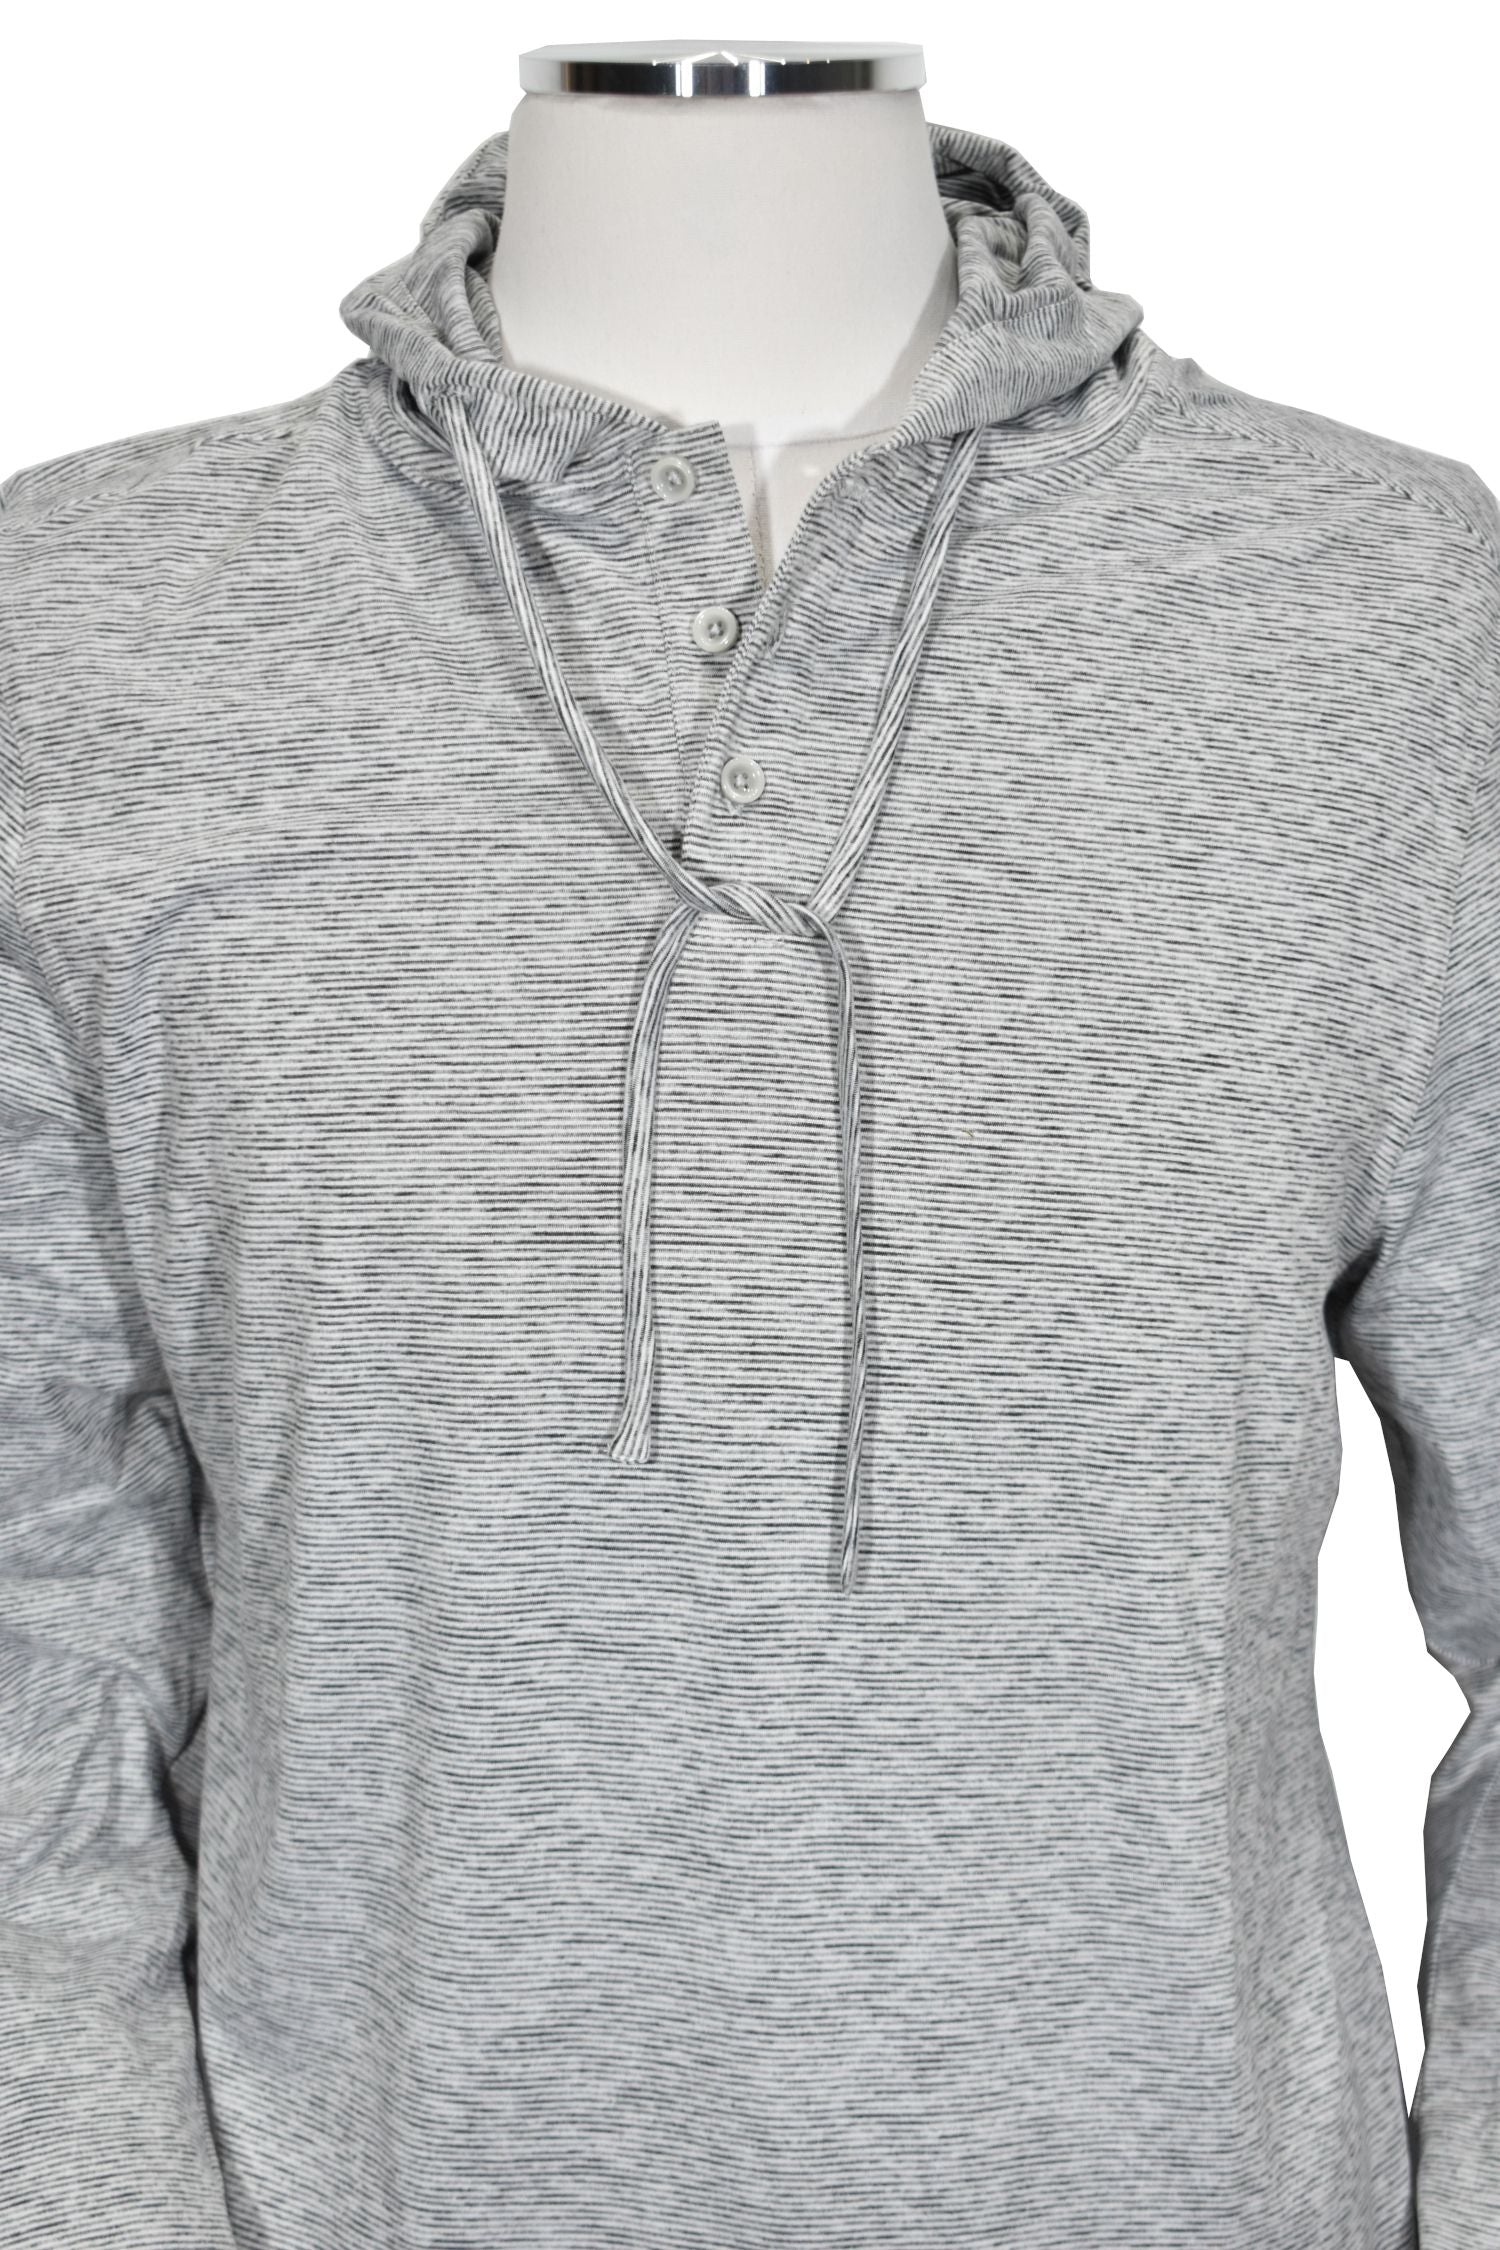 This classic fit feed stripe hoodie offers a contemporary style in a lightweight fabric with a soft, silky feel. The open sleeve and open bottom provide added mobility for all-day comfort. Available in gray or blue, it is the perfect hoodie for any occasion.  Classic fit.  Open sleeve and open bottom, super soft and a little heavier than a tee shirt. 